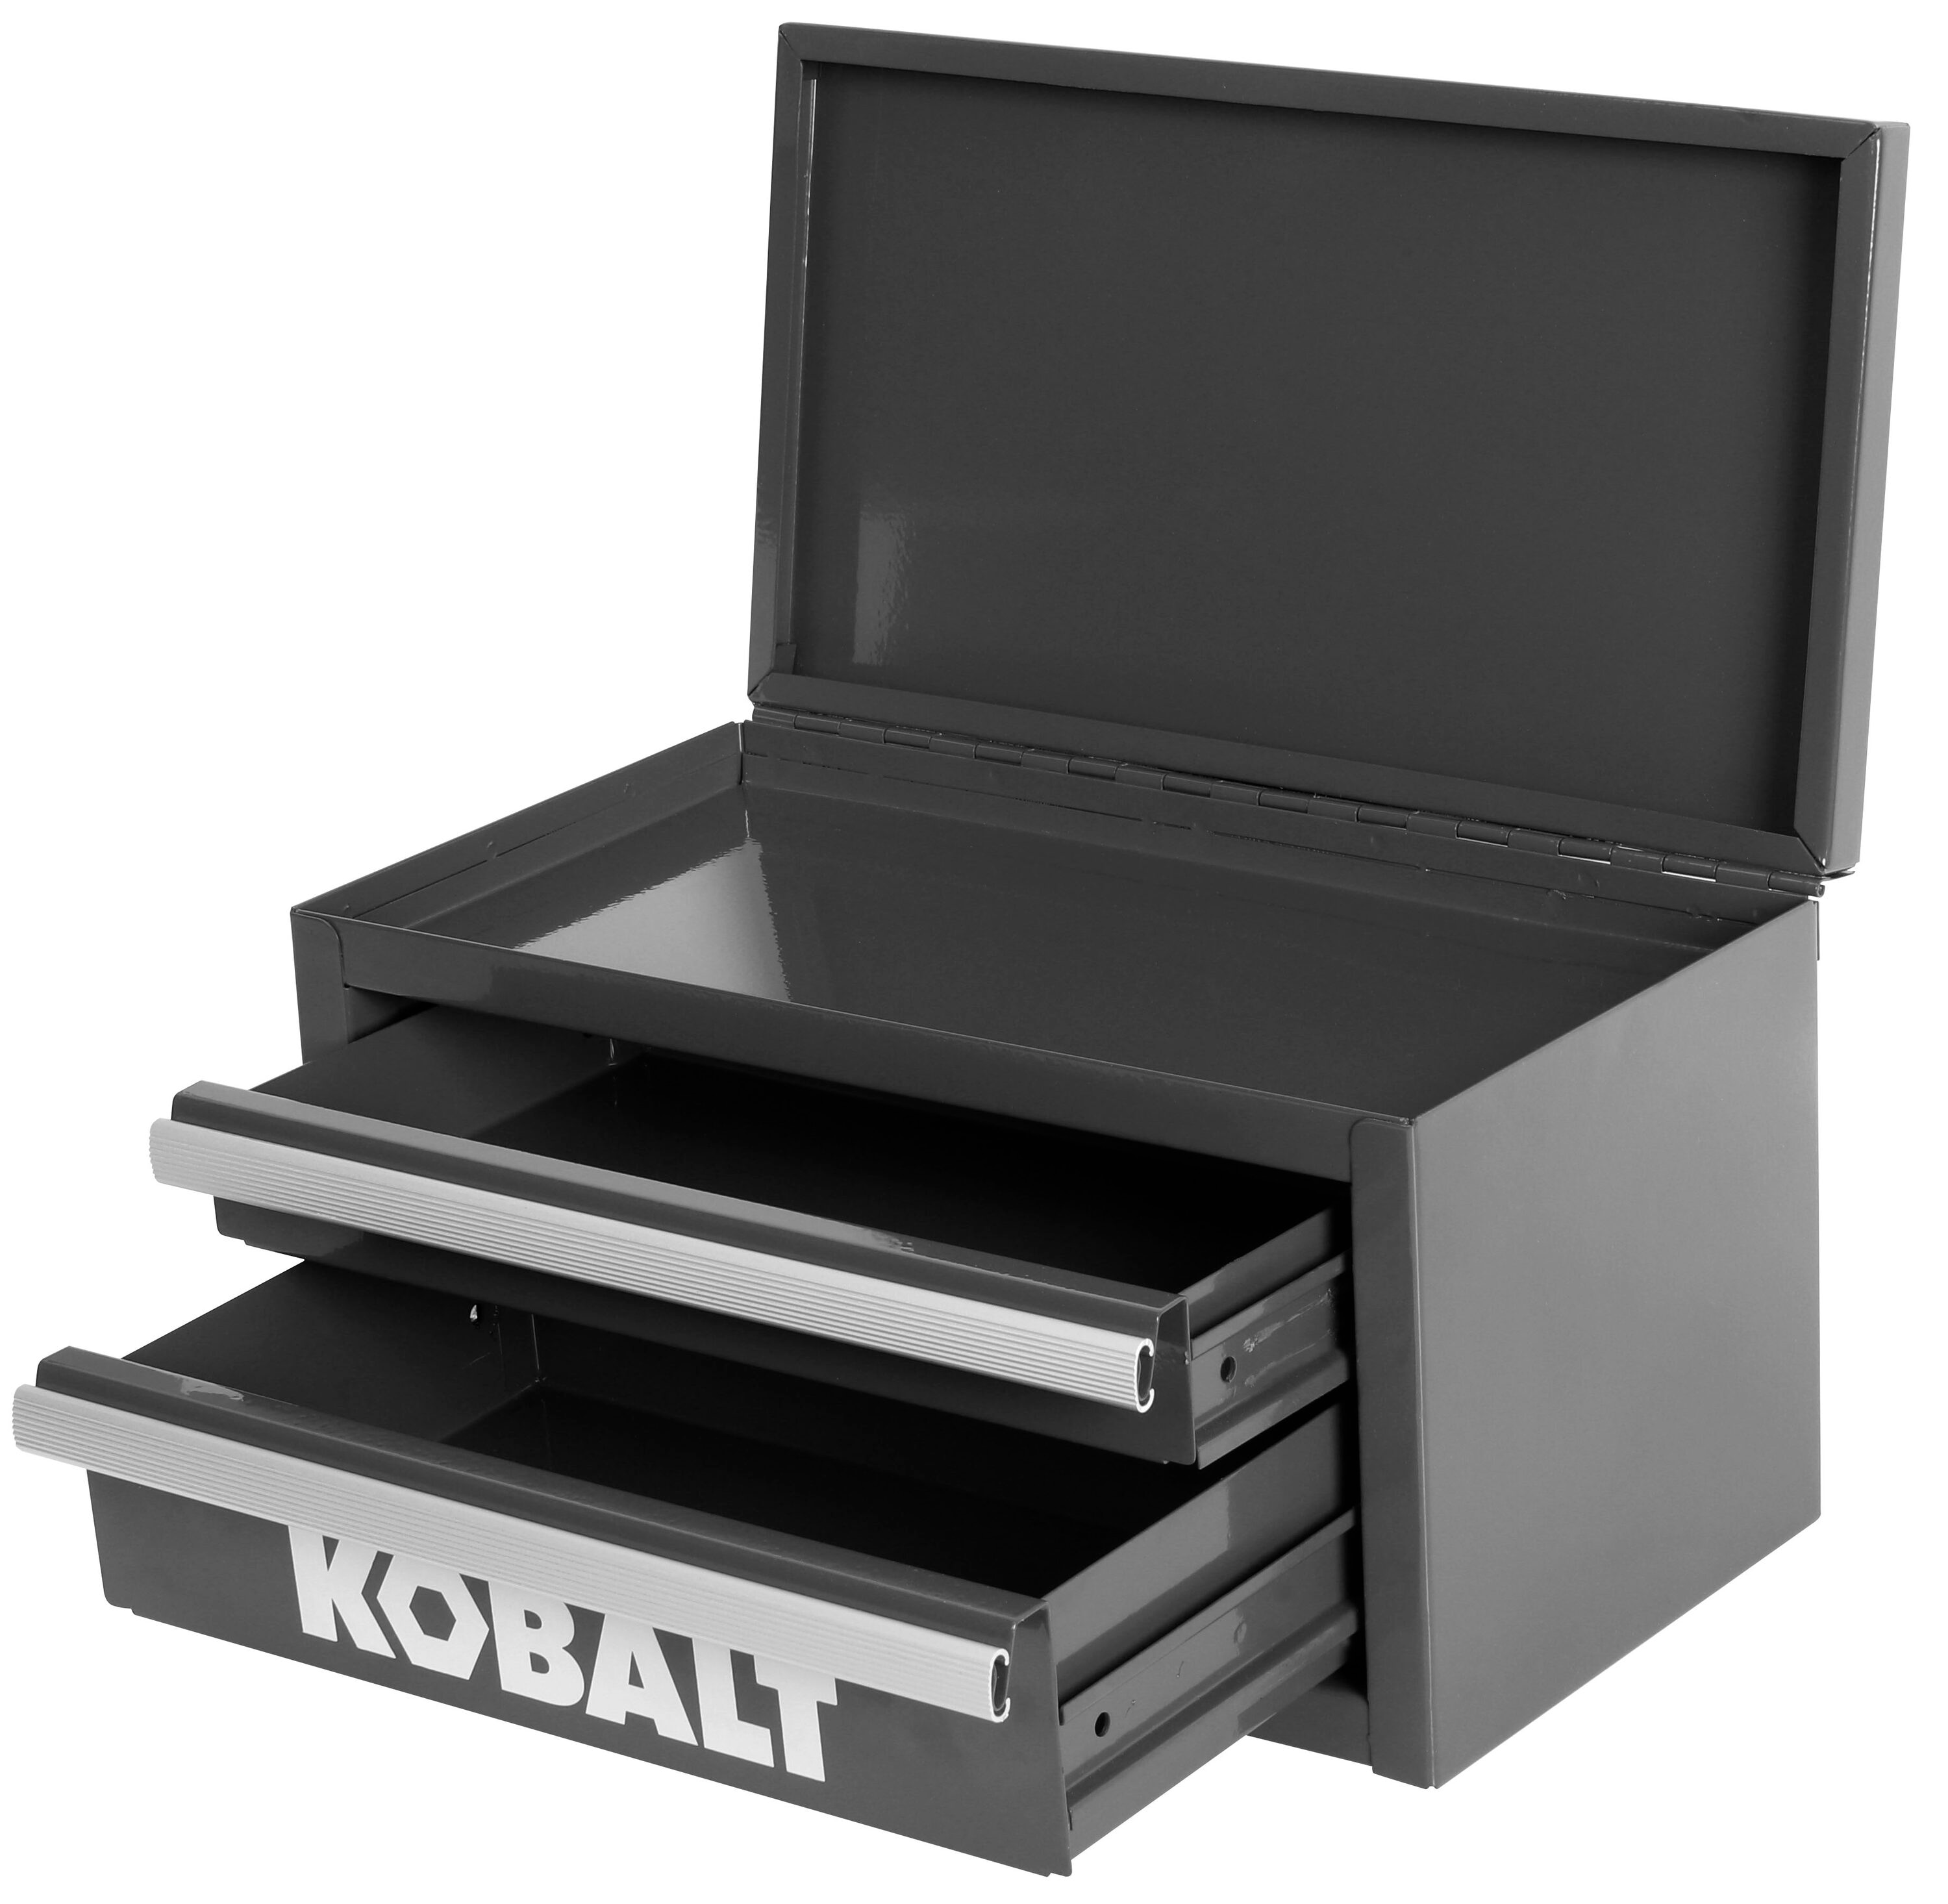 If you can get your hands on the Kobalt mini desktop toolbox, I highly  recommend it to organize all your notions! : r/quilting